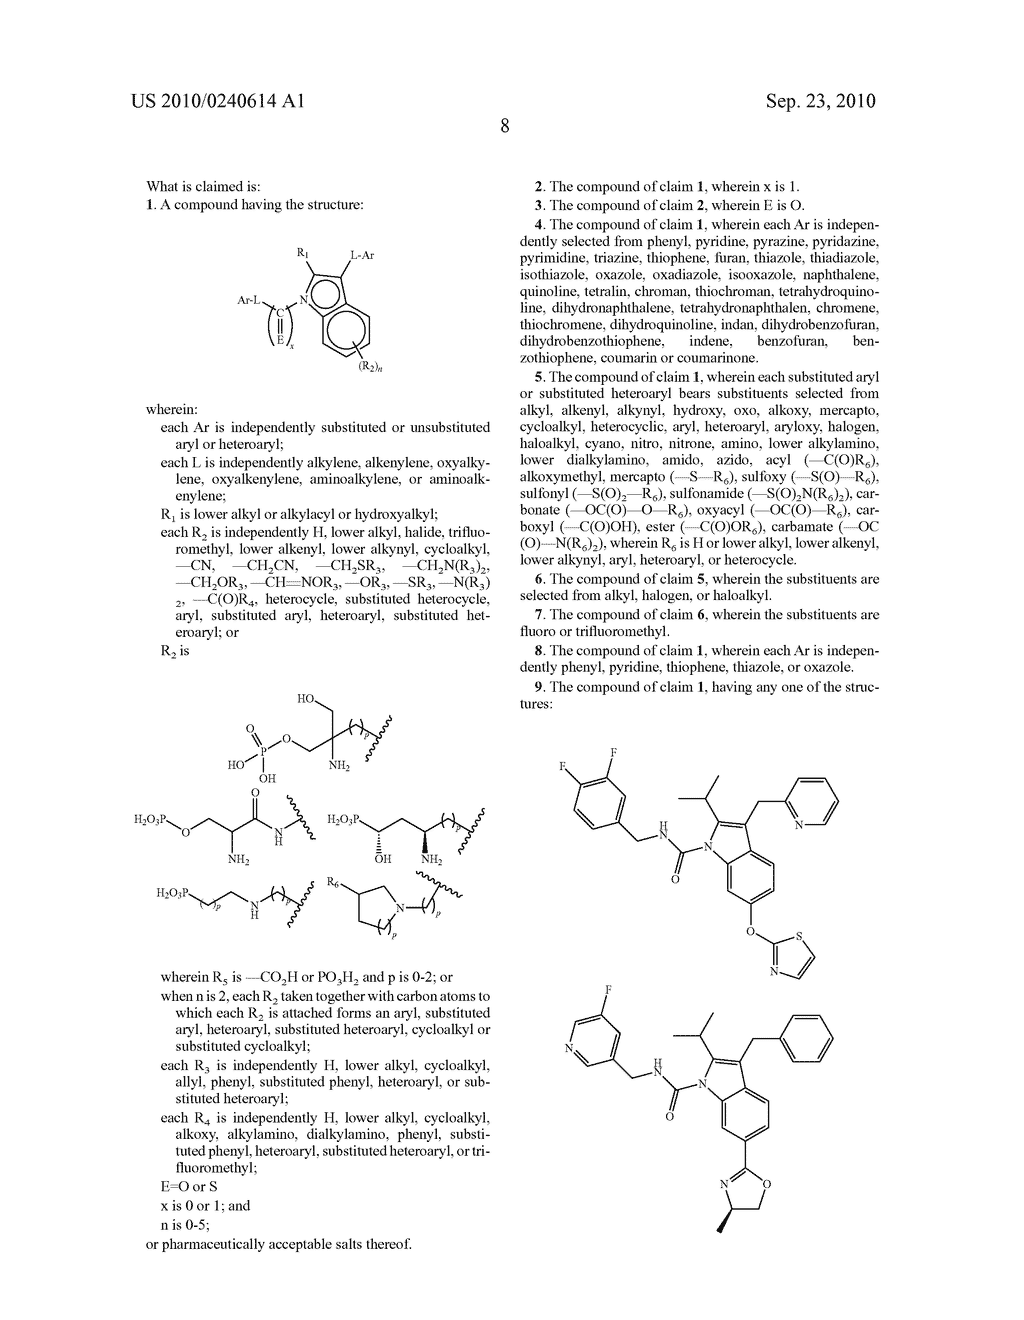 Indole Compounds Bearing Aryl or Heteroaryl Groups Having Sphingosine 1-Phosphate (S1P) Receptor Biological Activity - diagram, schematic, and image 09